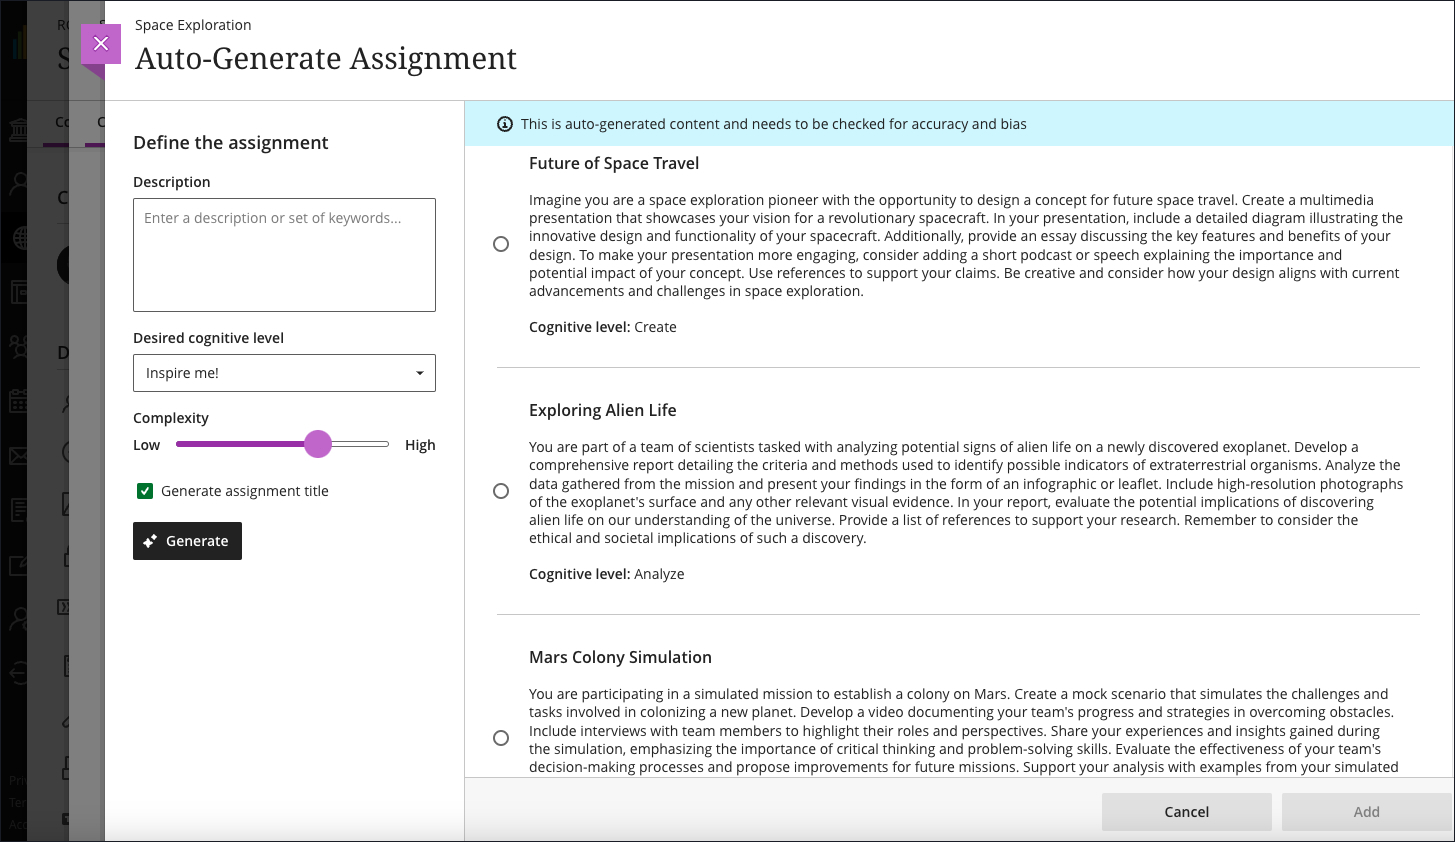 The "Auto-Generate Assignment" panel is opened, with three generated prompts on screen: each include a title, prompt, and cognitive process.